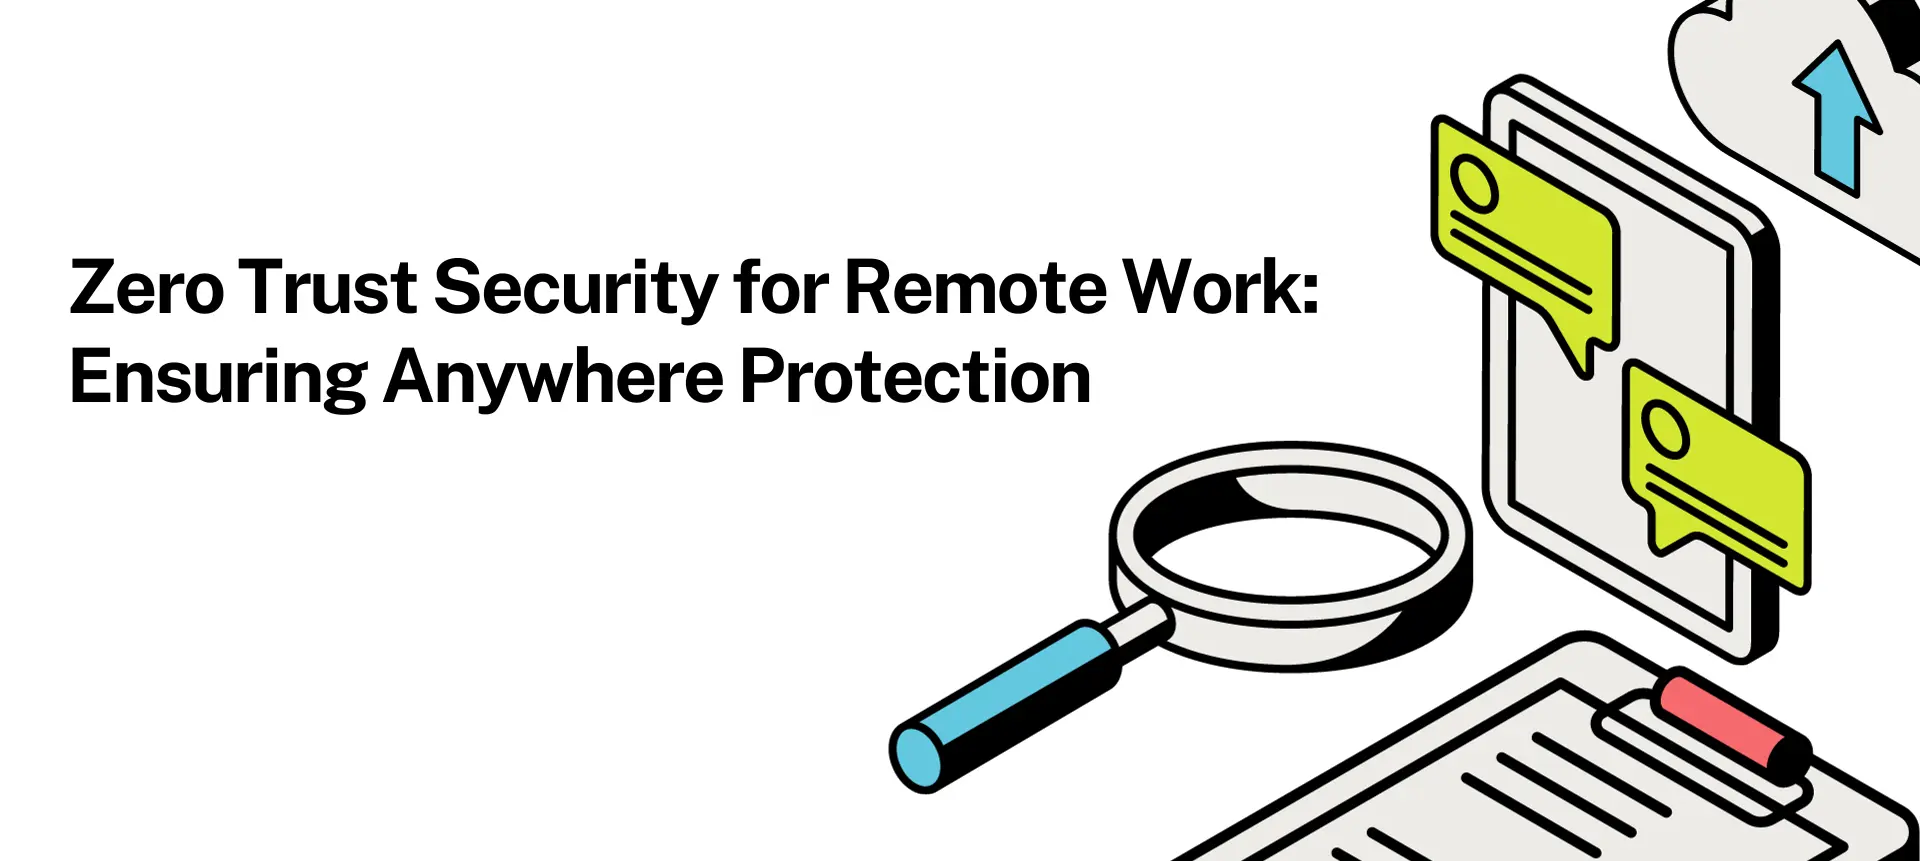 Zero Trust Security for Remote Work Ensuring Anywhere Protection